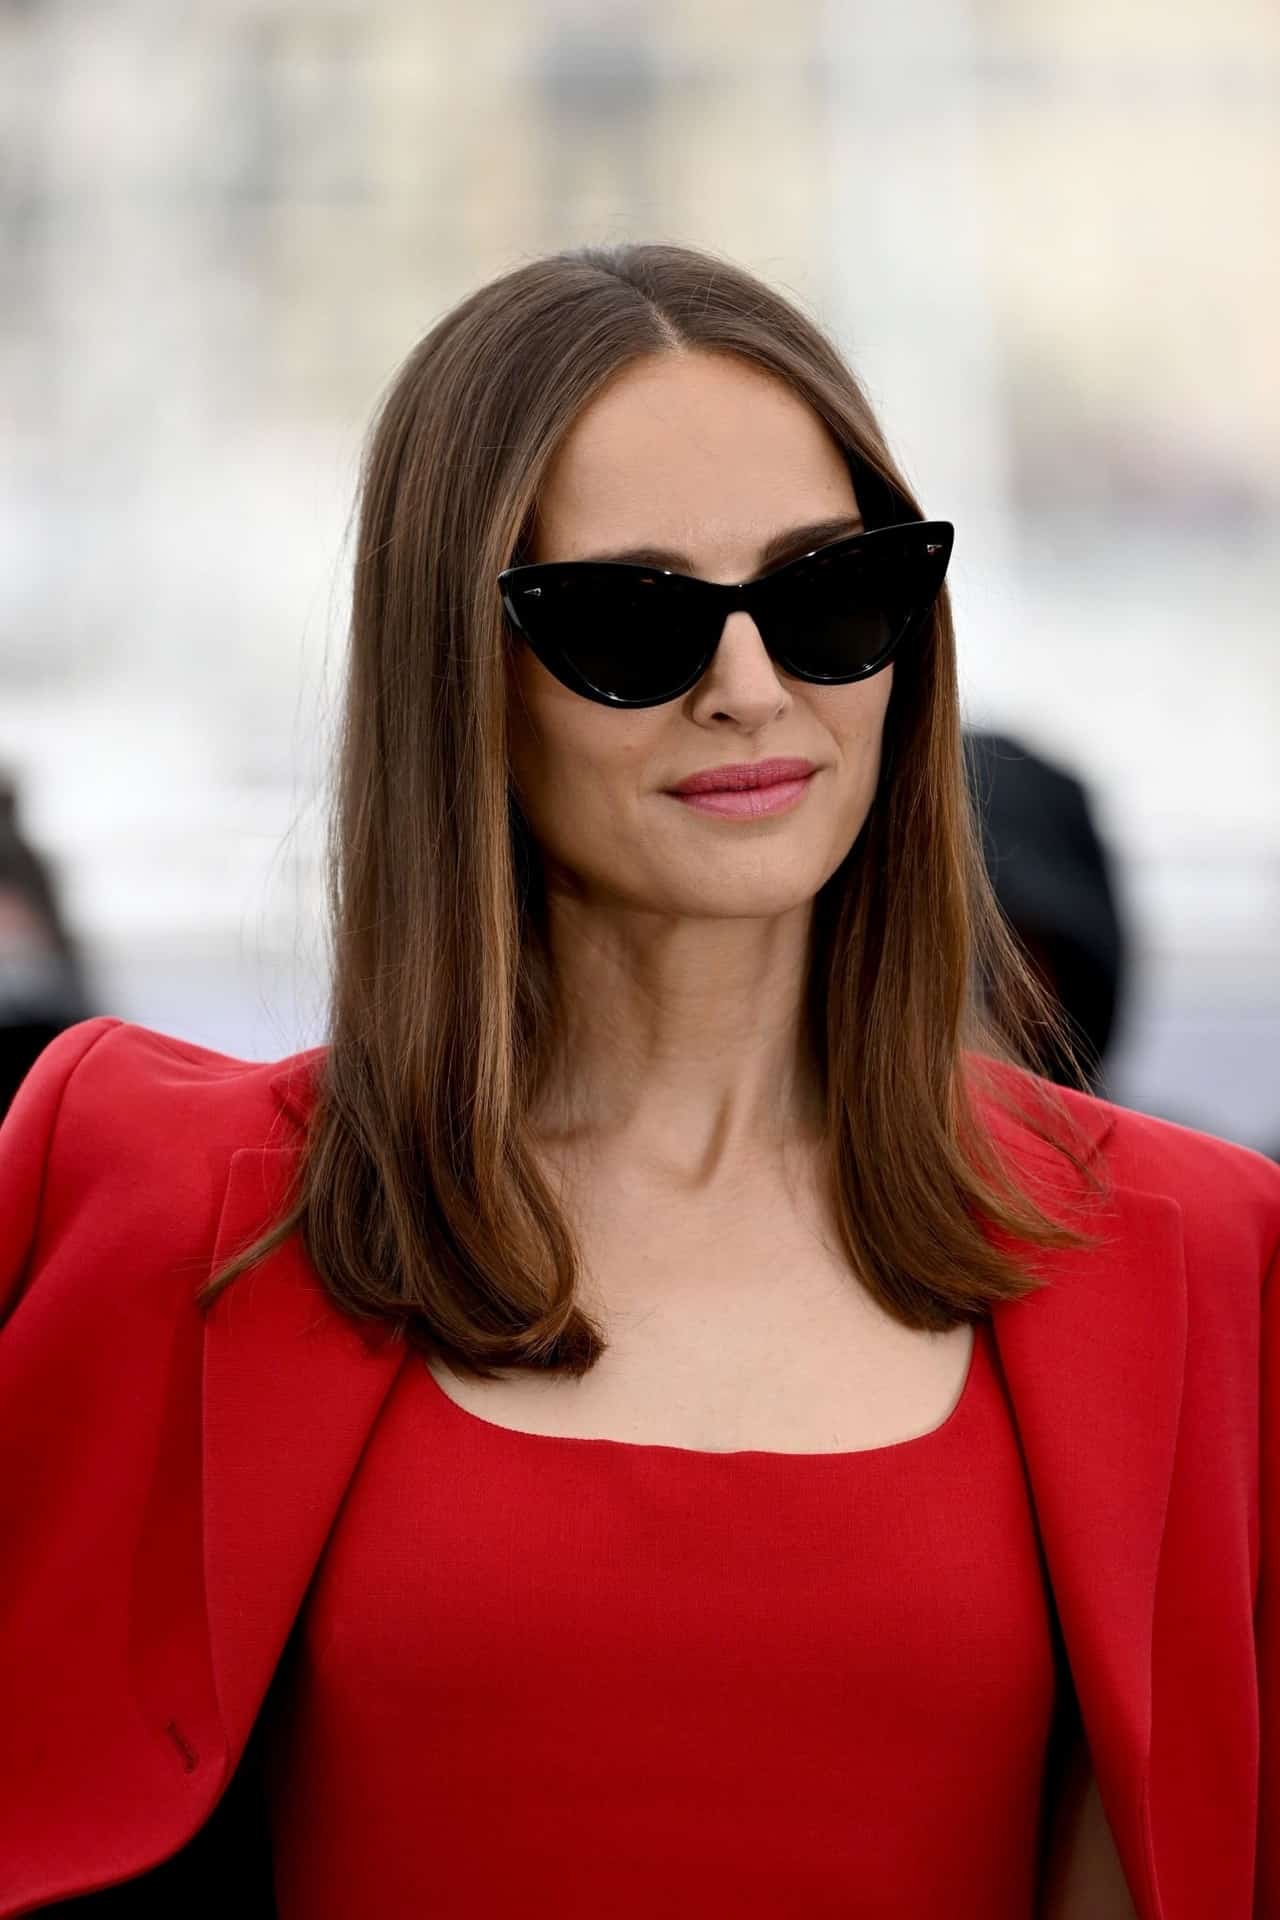 Natalie Portman in a Vibrant Red Dior Outfit at the Cannes Film Festival